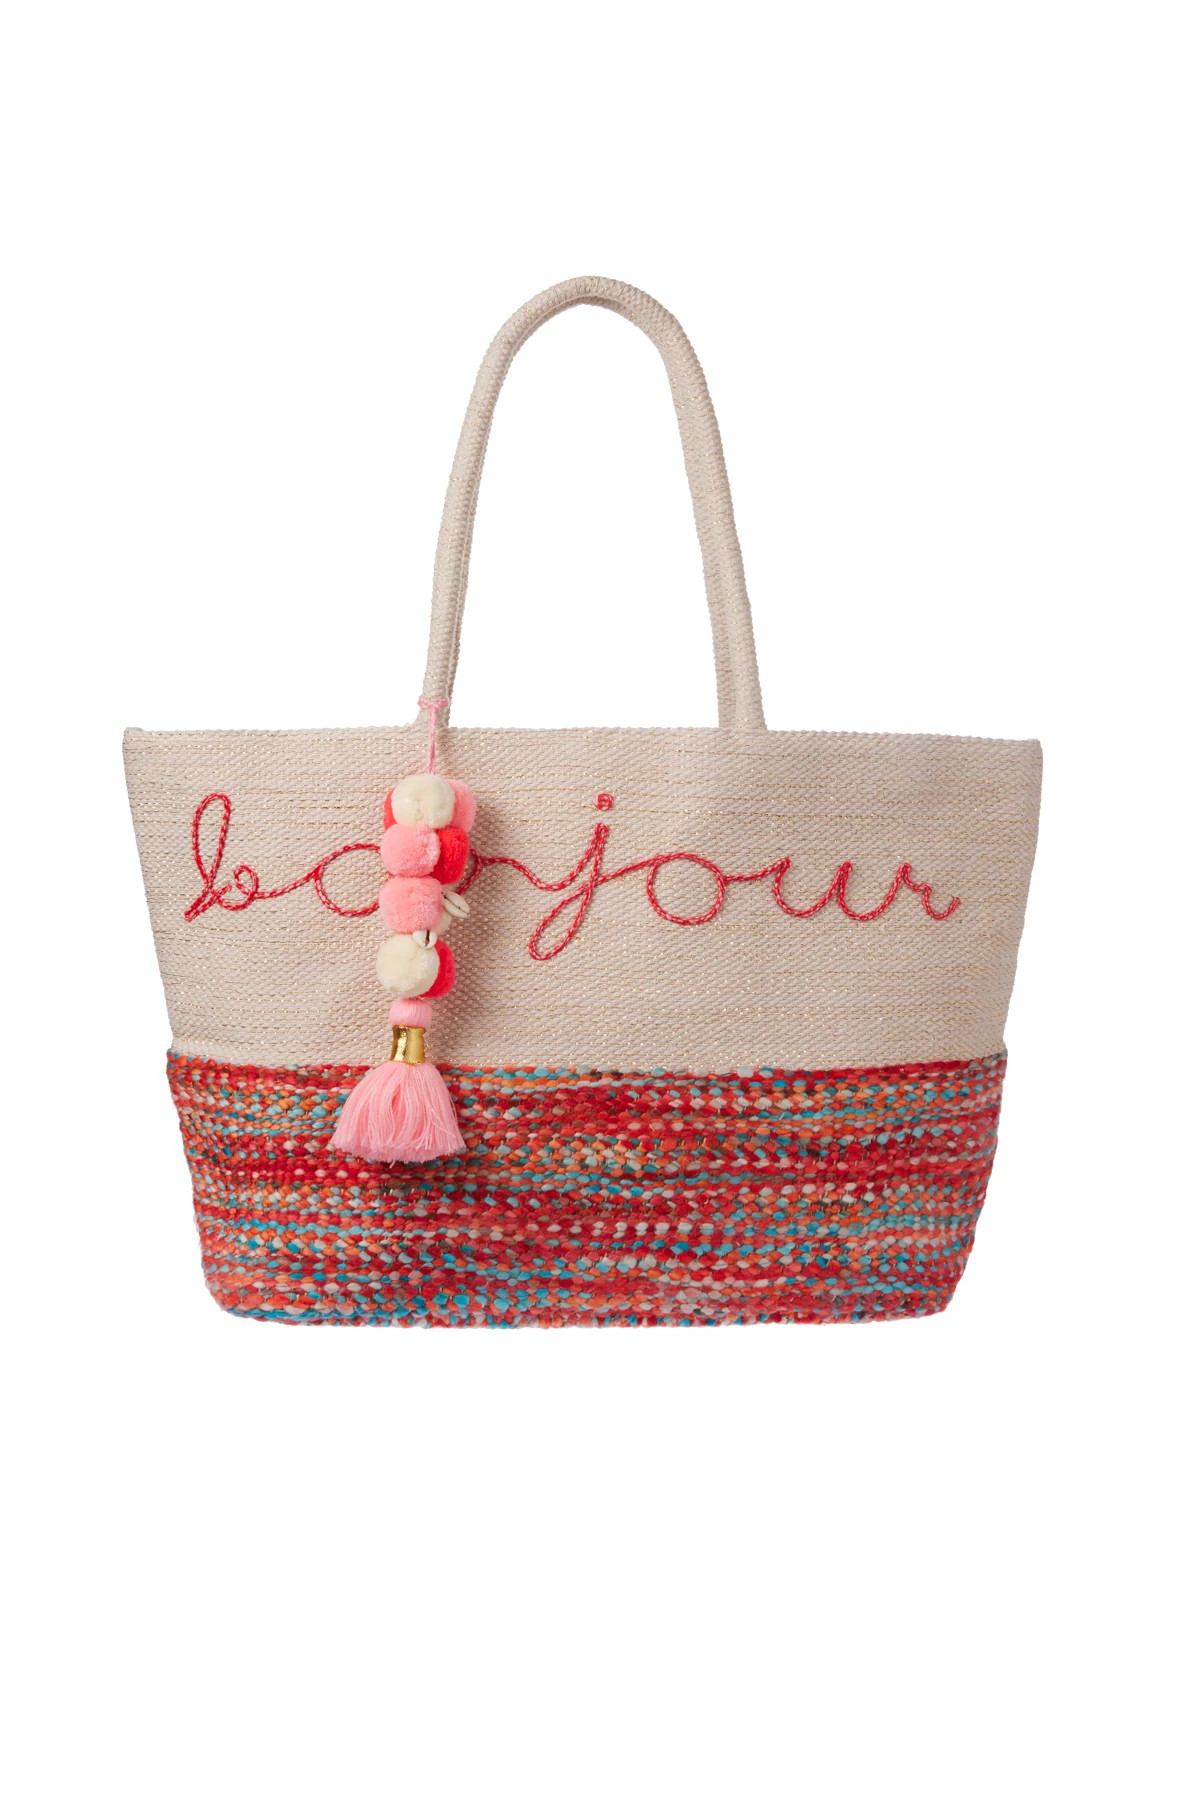 MULTI Bonjour Embroidered Tote image number 1